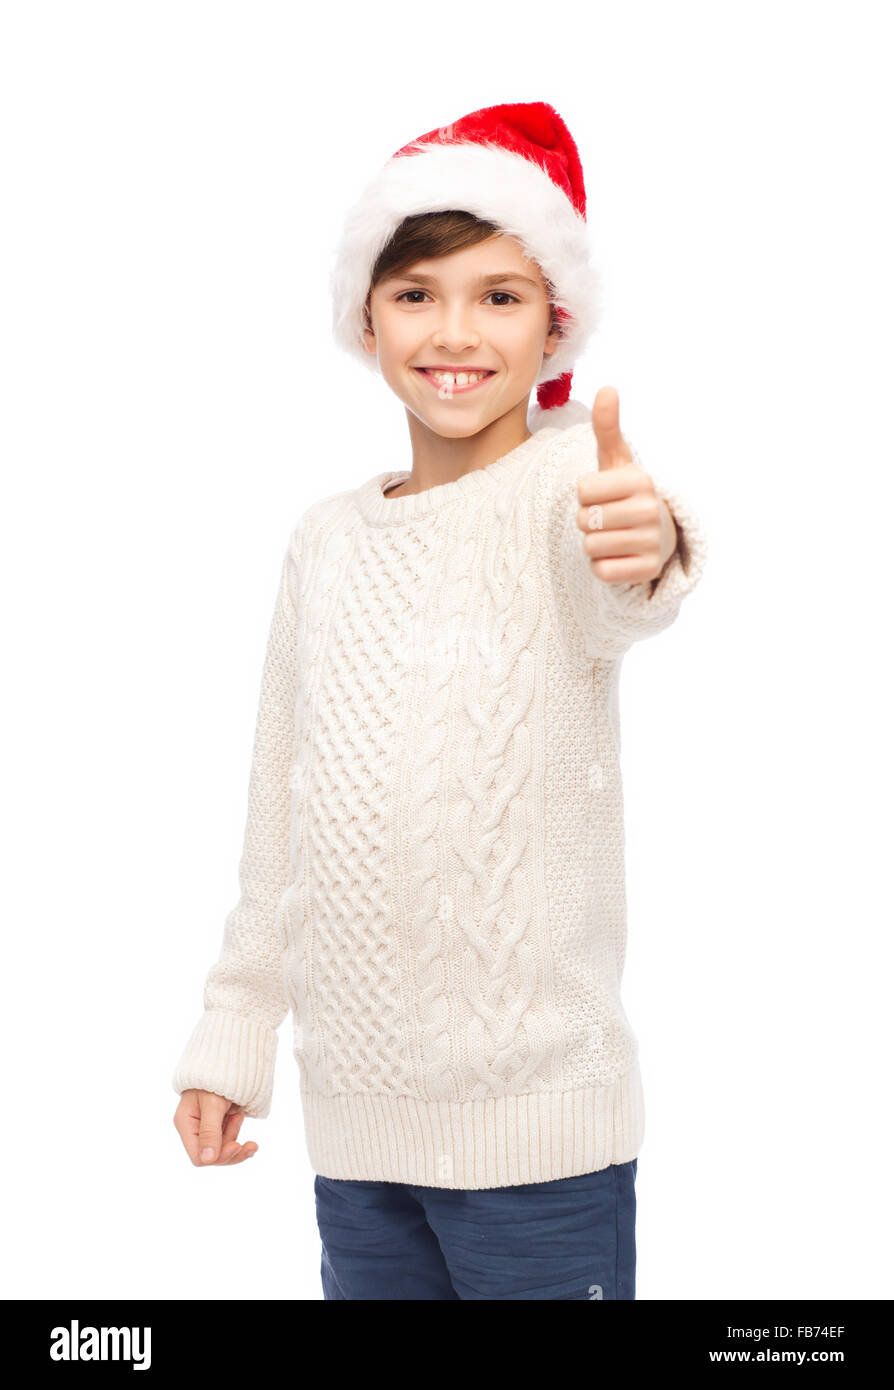 smiling happy boy in santa hat showing thumbs up Stock Photo